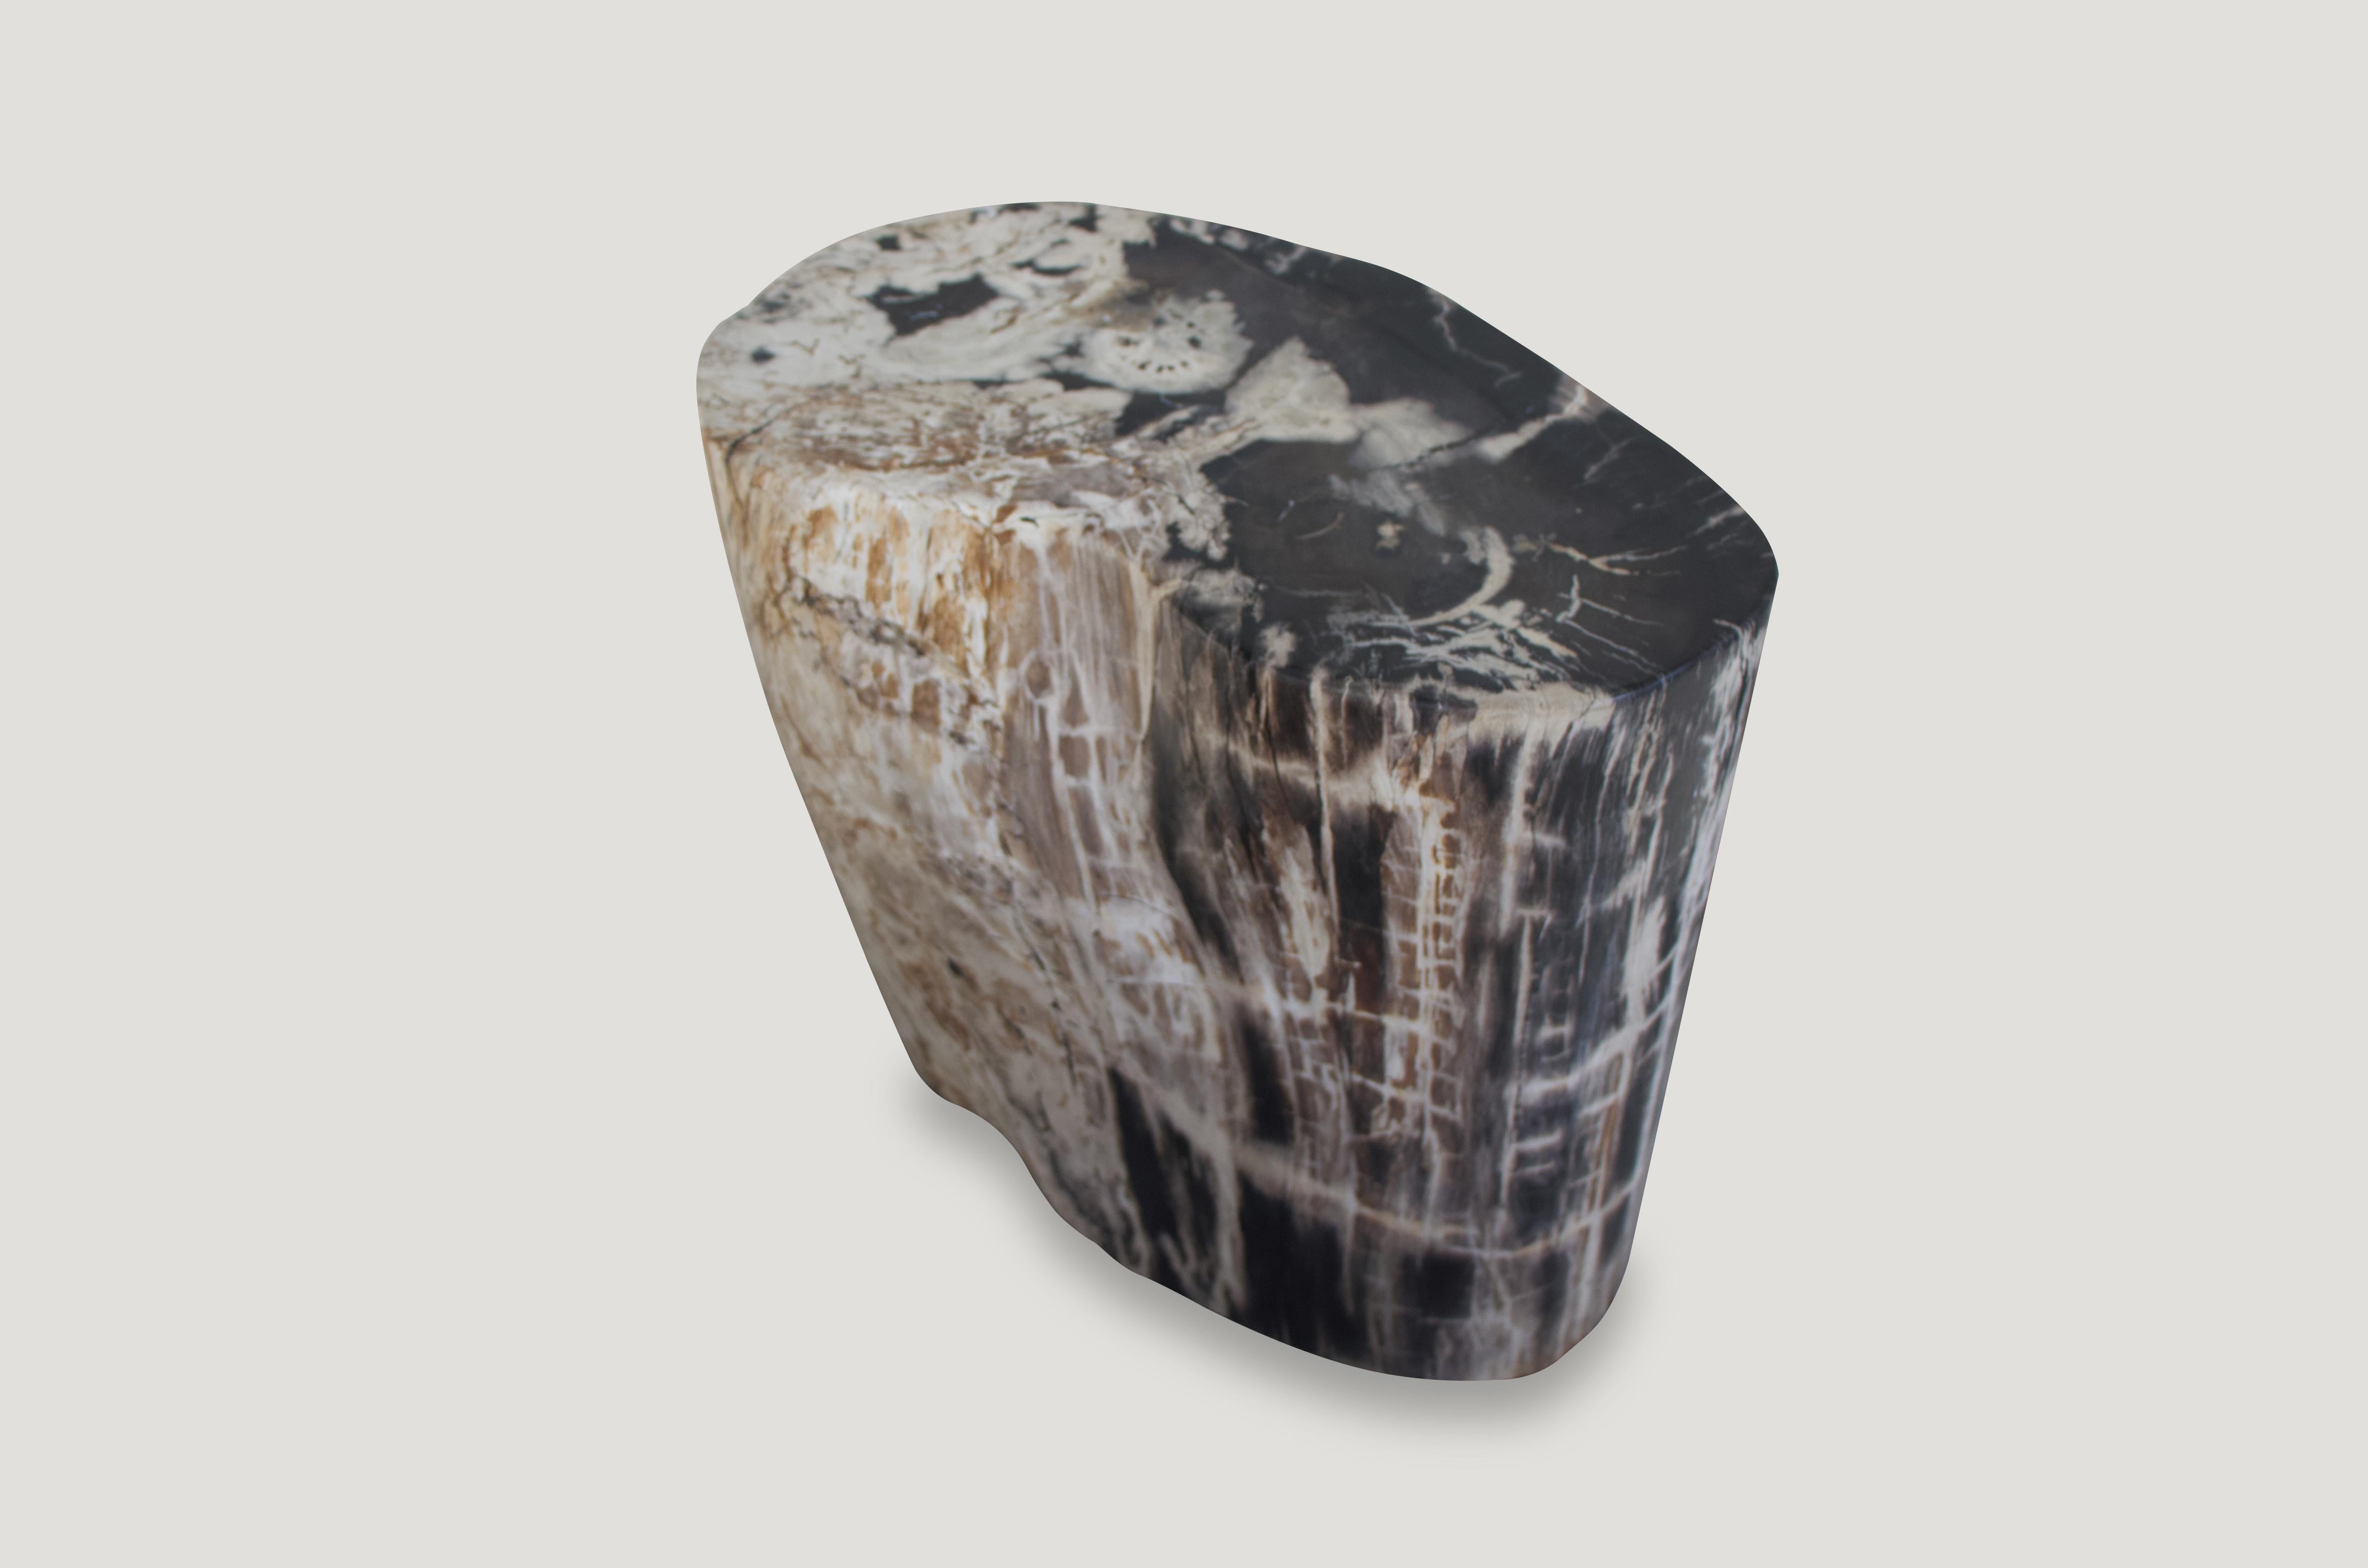 Great oval shape on this high quality petrified wood side table with neutral tones. It’s fascinating how Mother Nature produces these stunning 40 million year old petrified teak logs with such contrasting colors with natural patterns throughout.